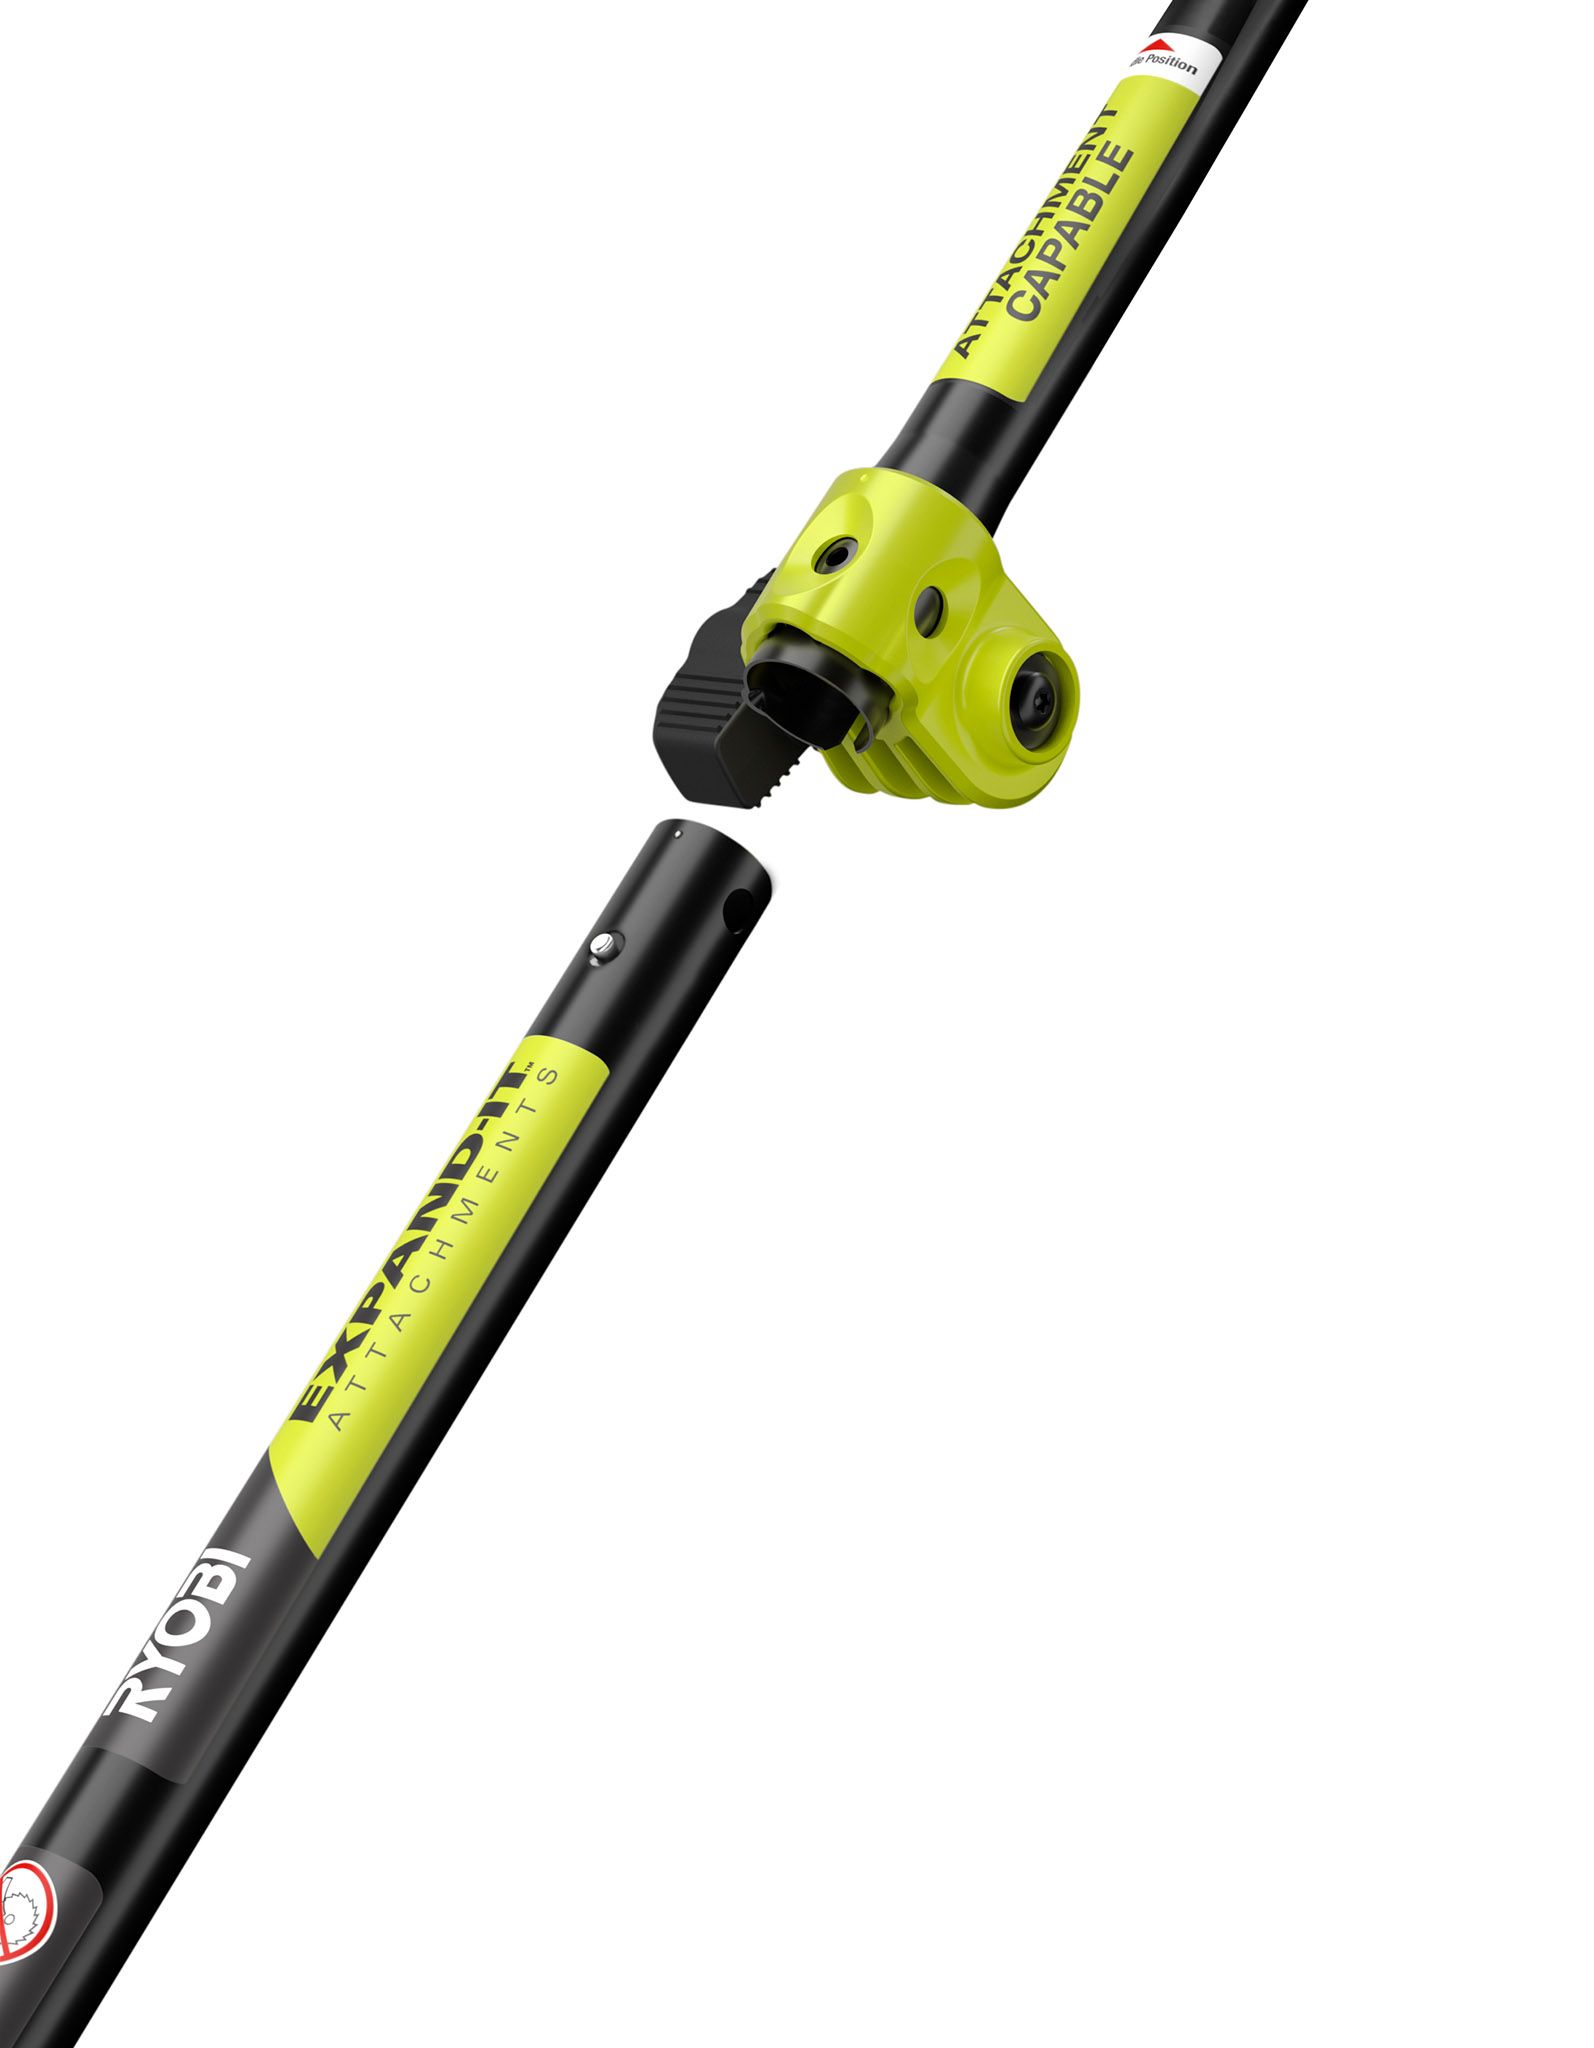 Compatible with RYOBI EXPAND-IT Attachments and Other Universal Gas Attachments